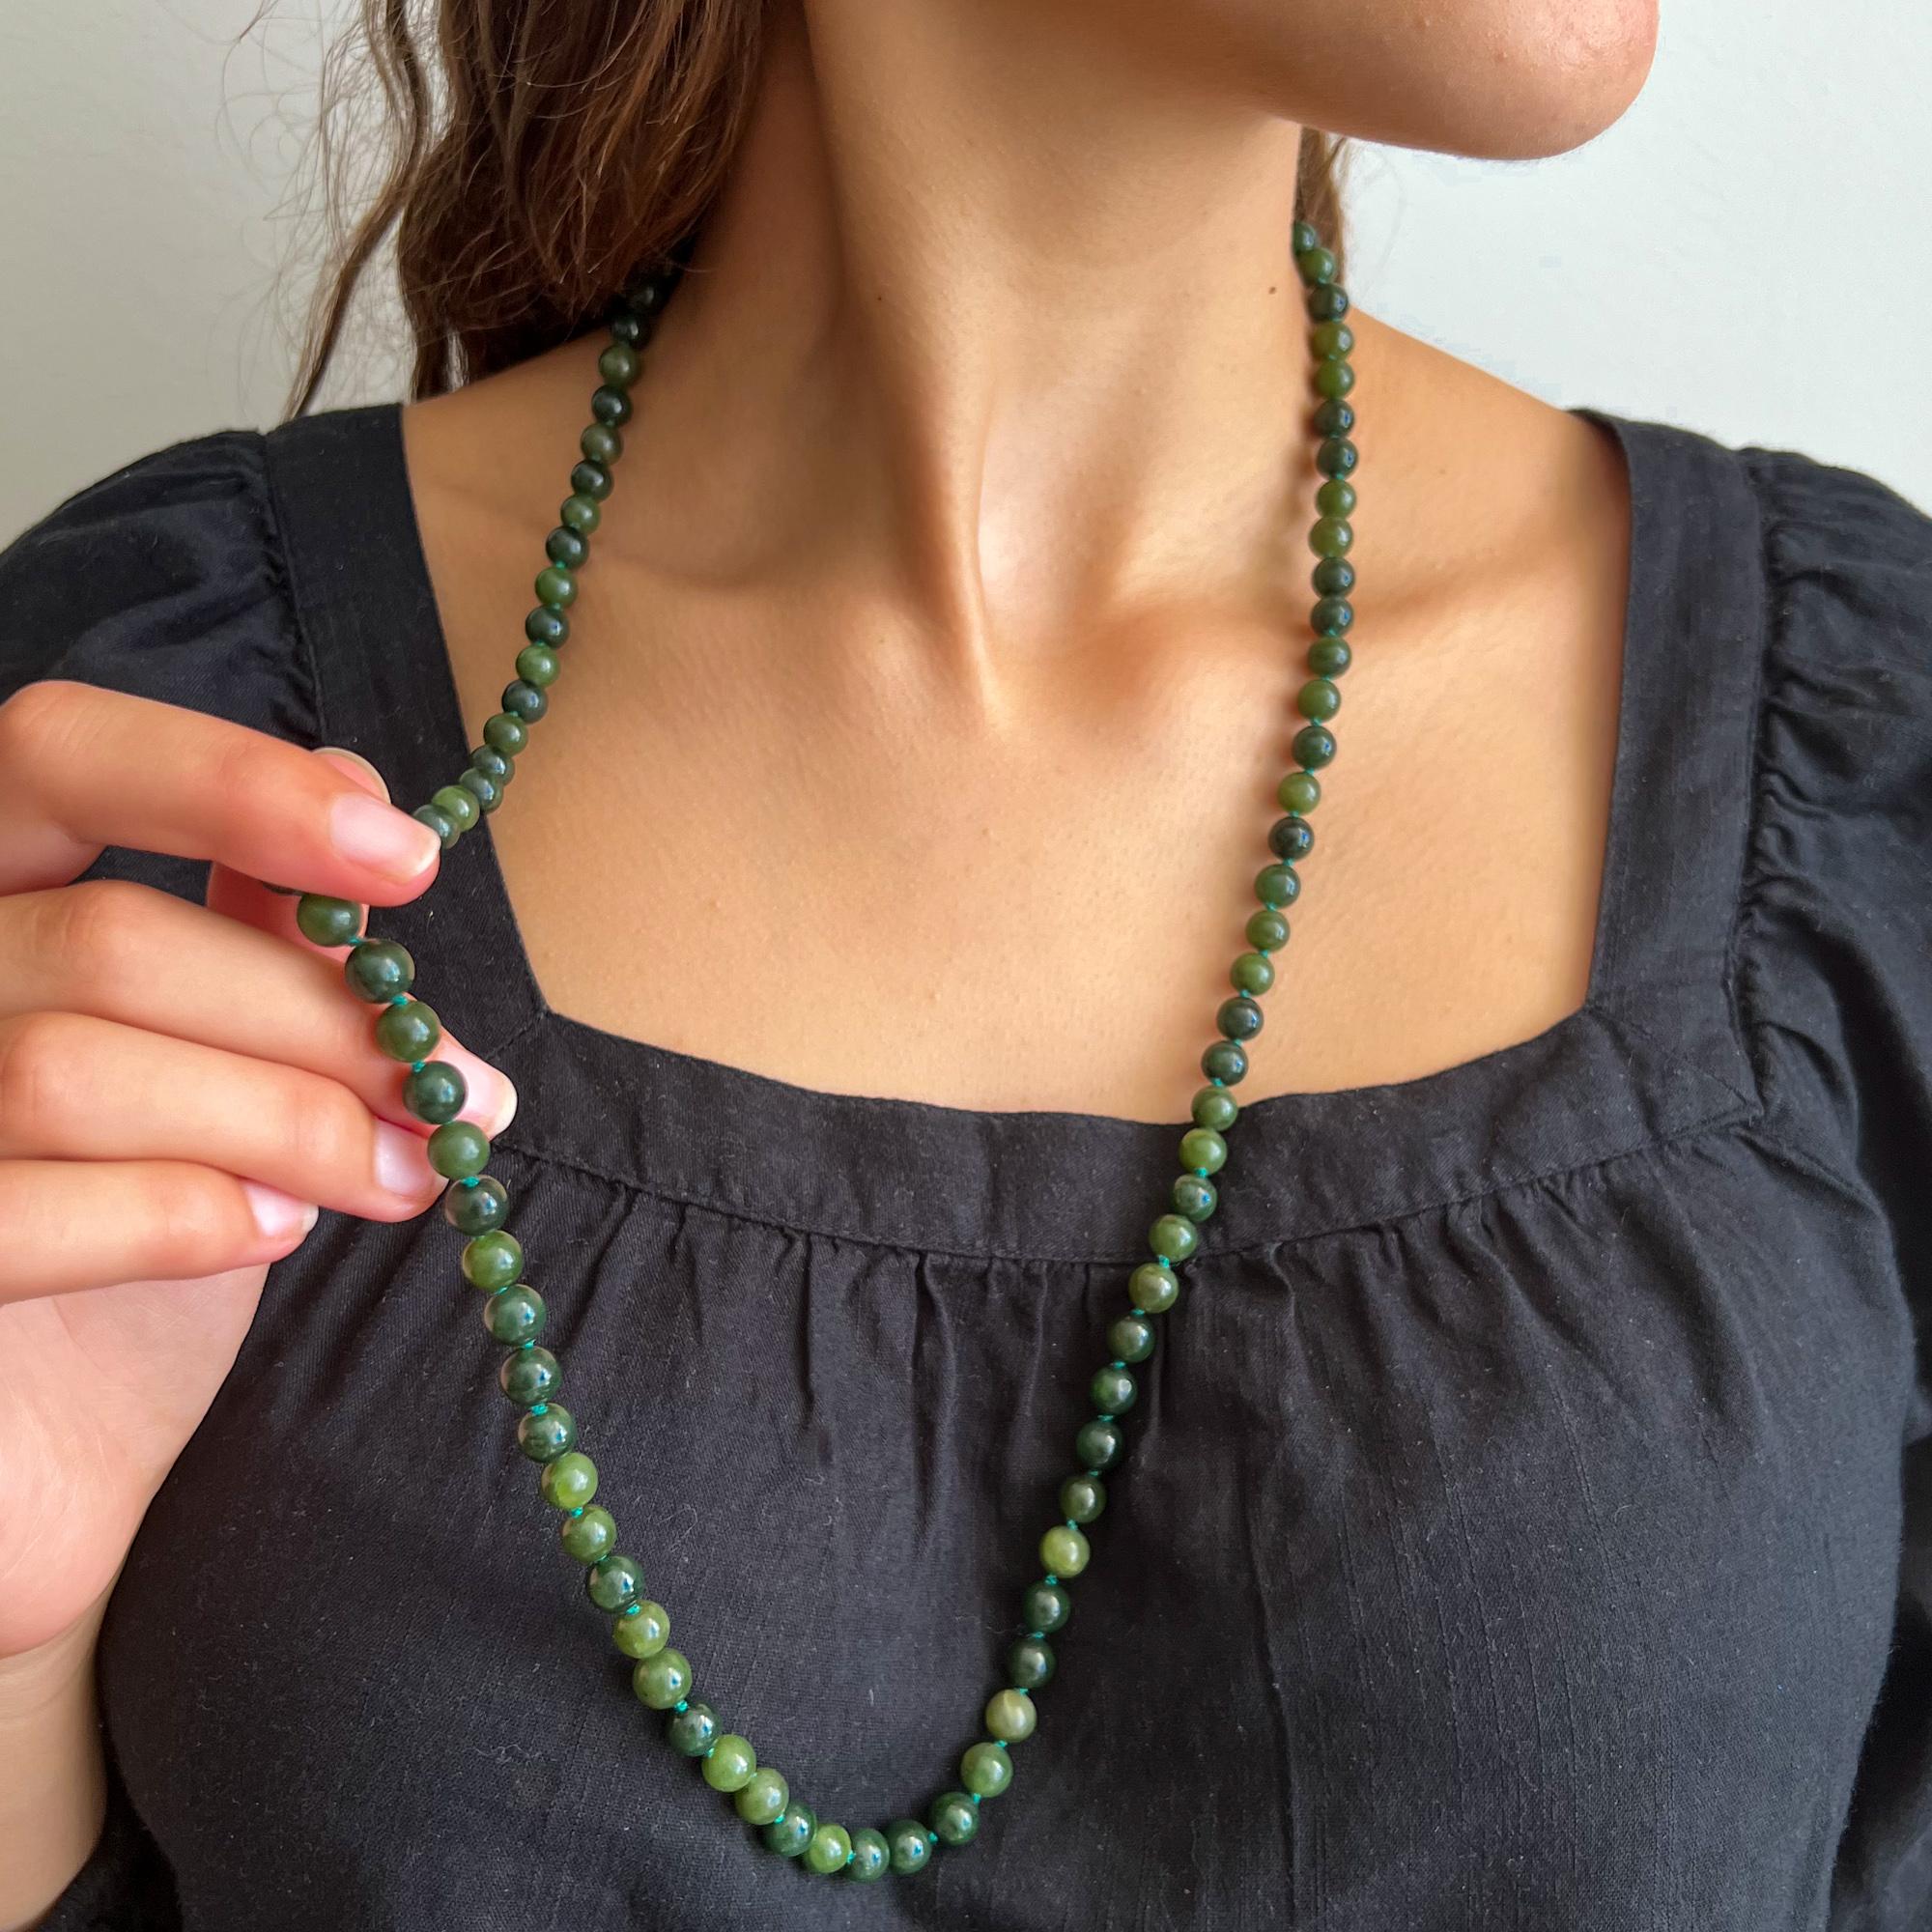 A vintage jade single-strand beaded necklace set with a gold ribbed ball clasp. The jade beads of this necklace are round-shaped and beautifully mottled with different hues of dark green. Between the beads the green thread is knotted, this ensures